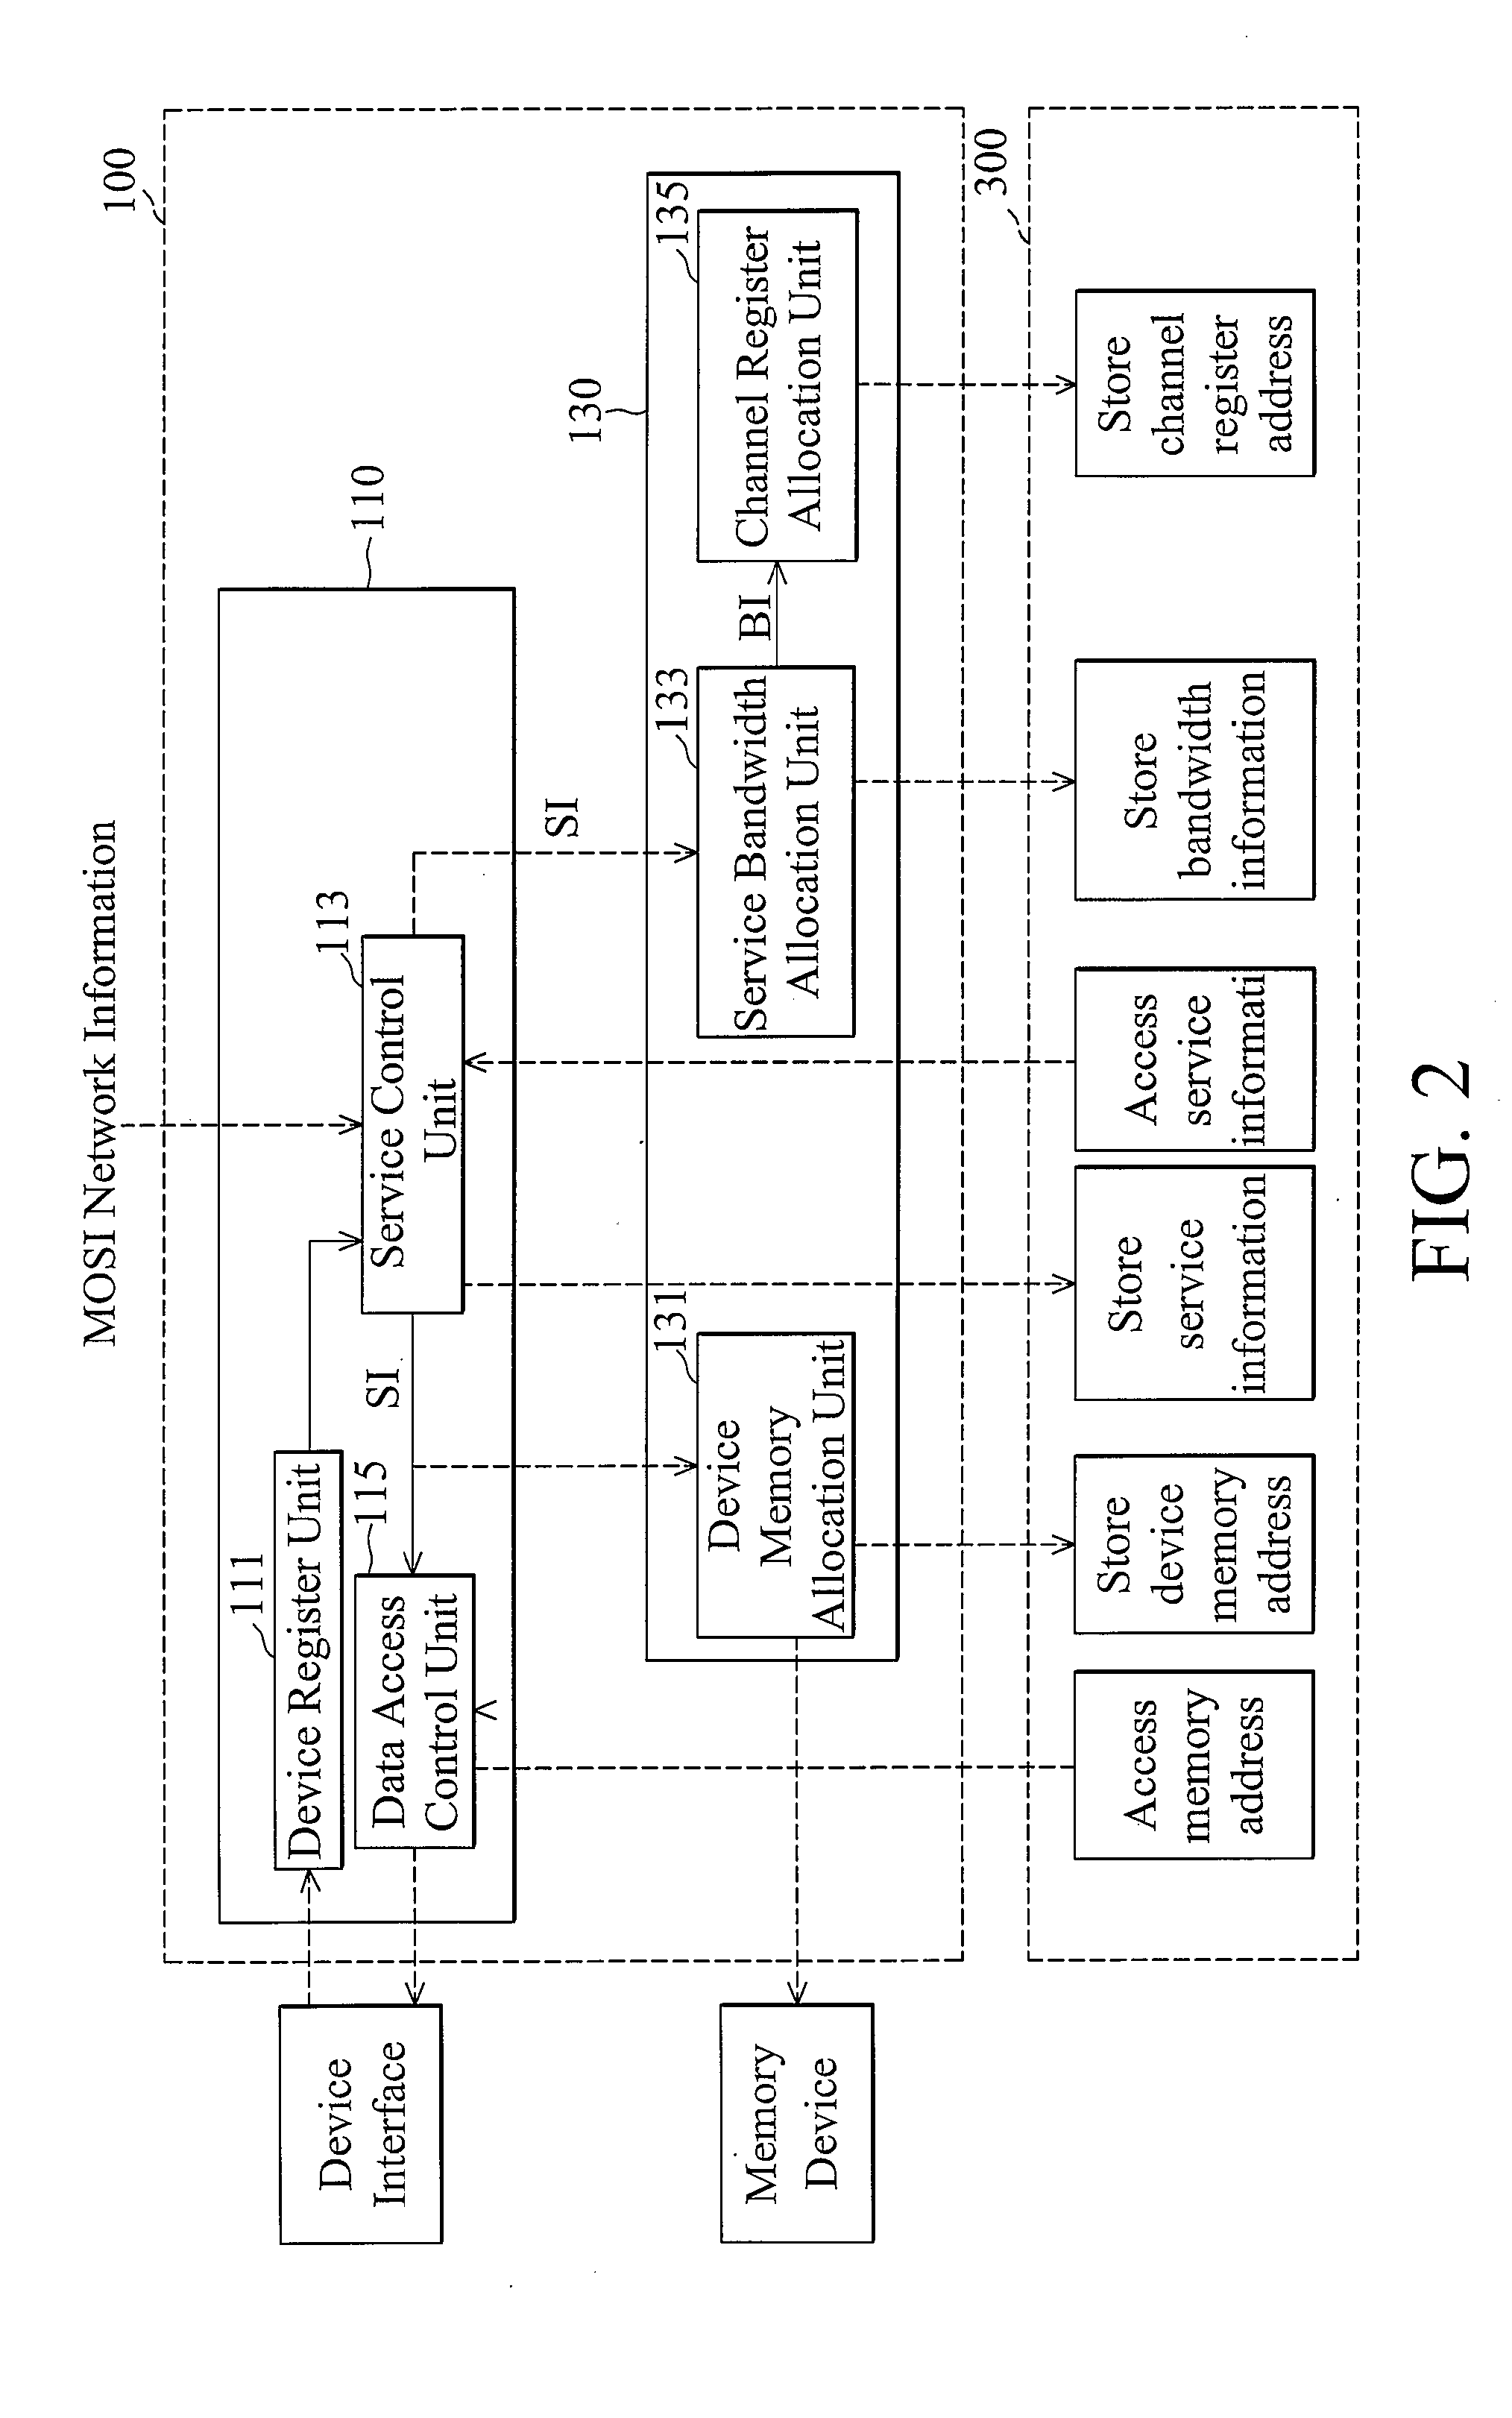 Multimedia data sharing system and method for most network